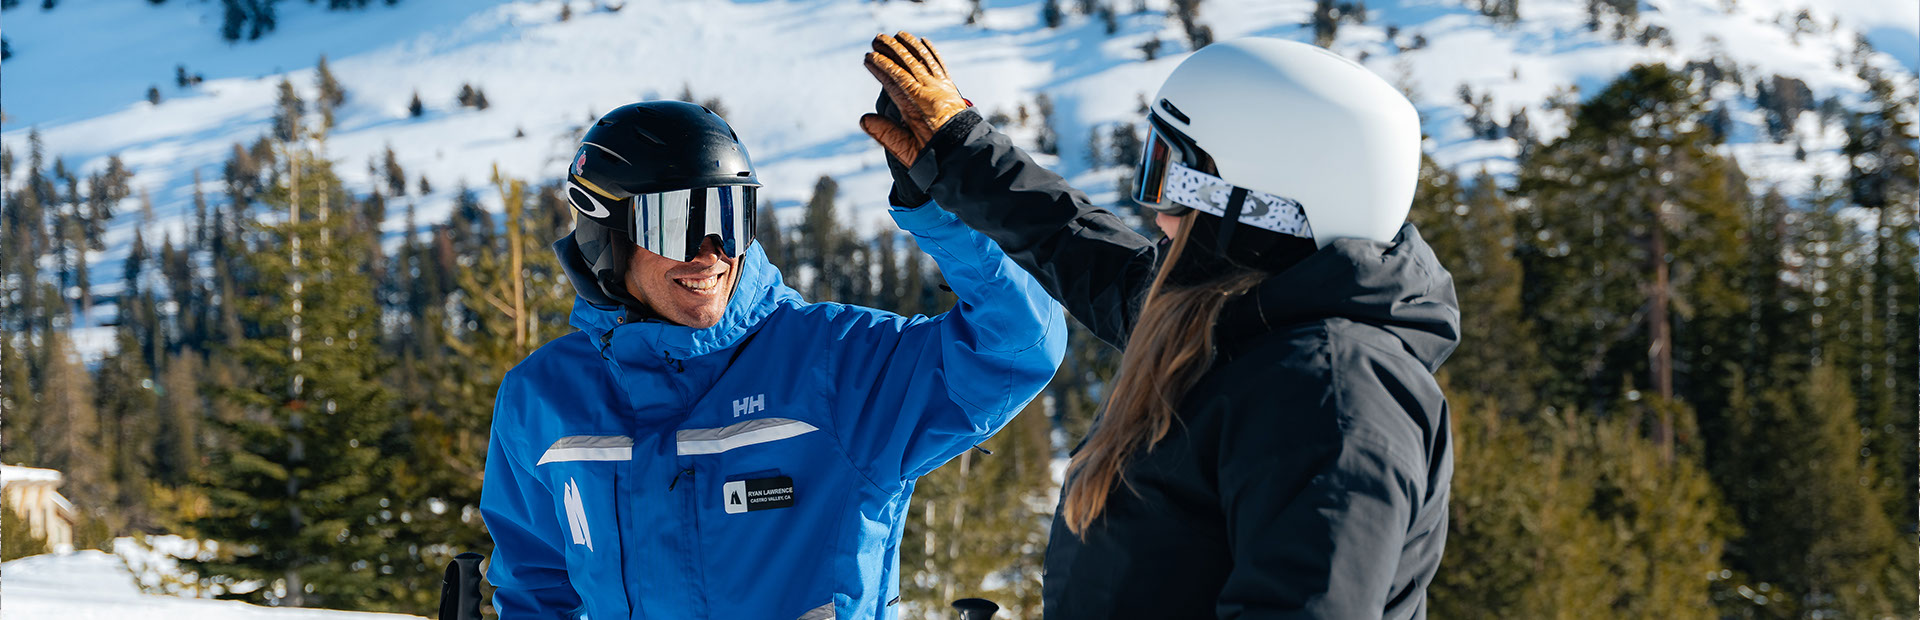 Ski instructor giving a skier a high five